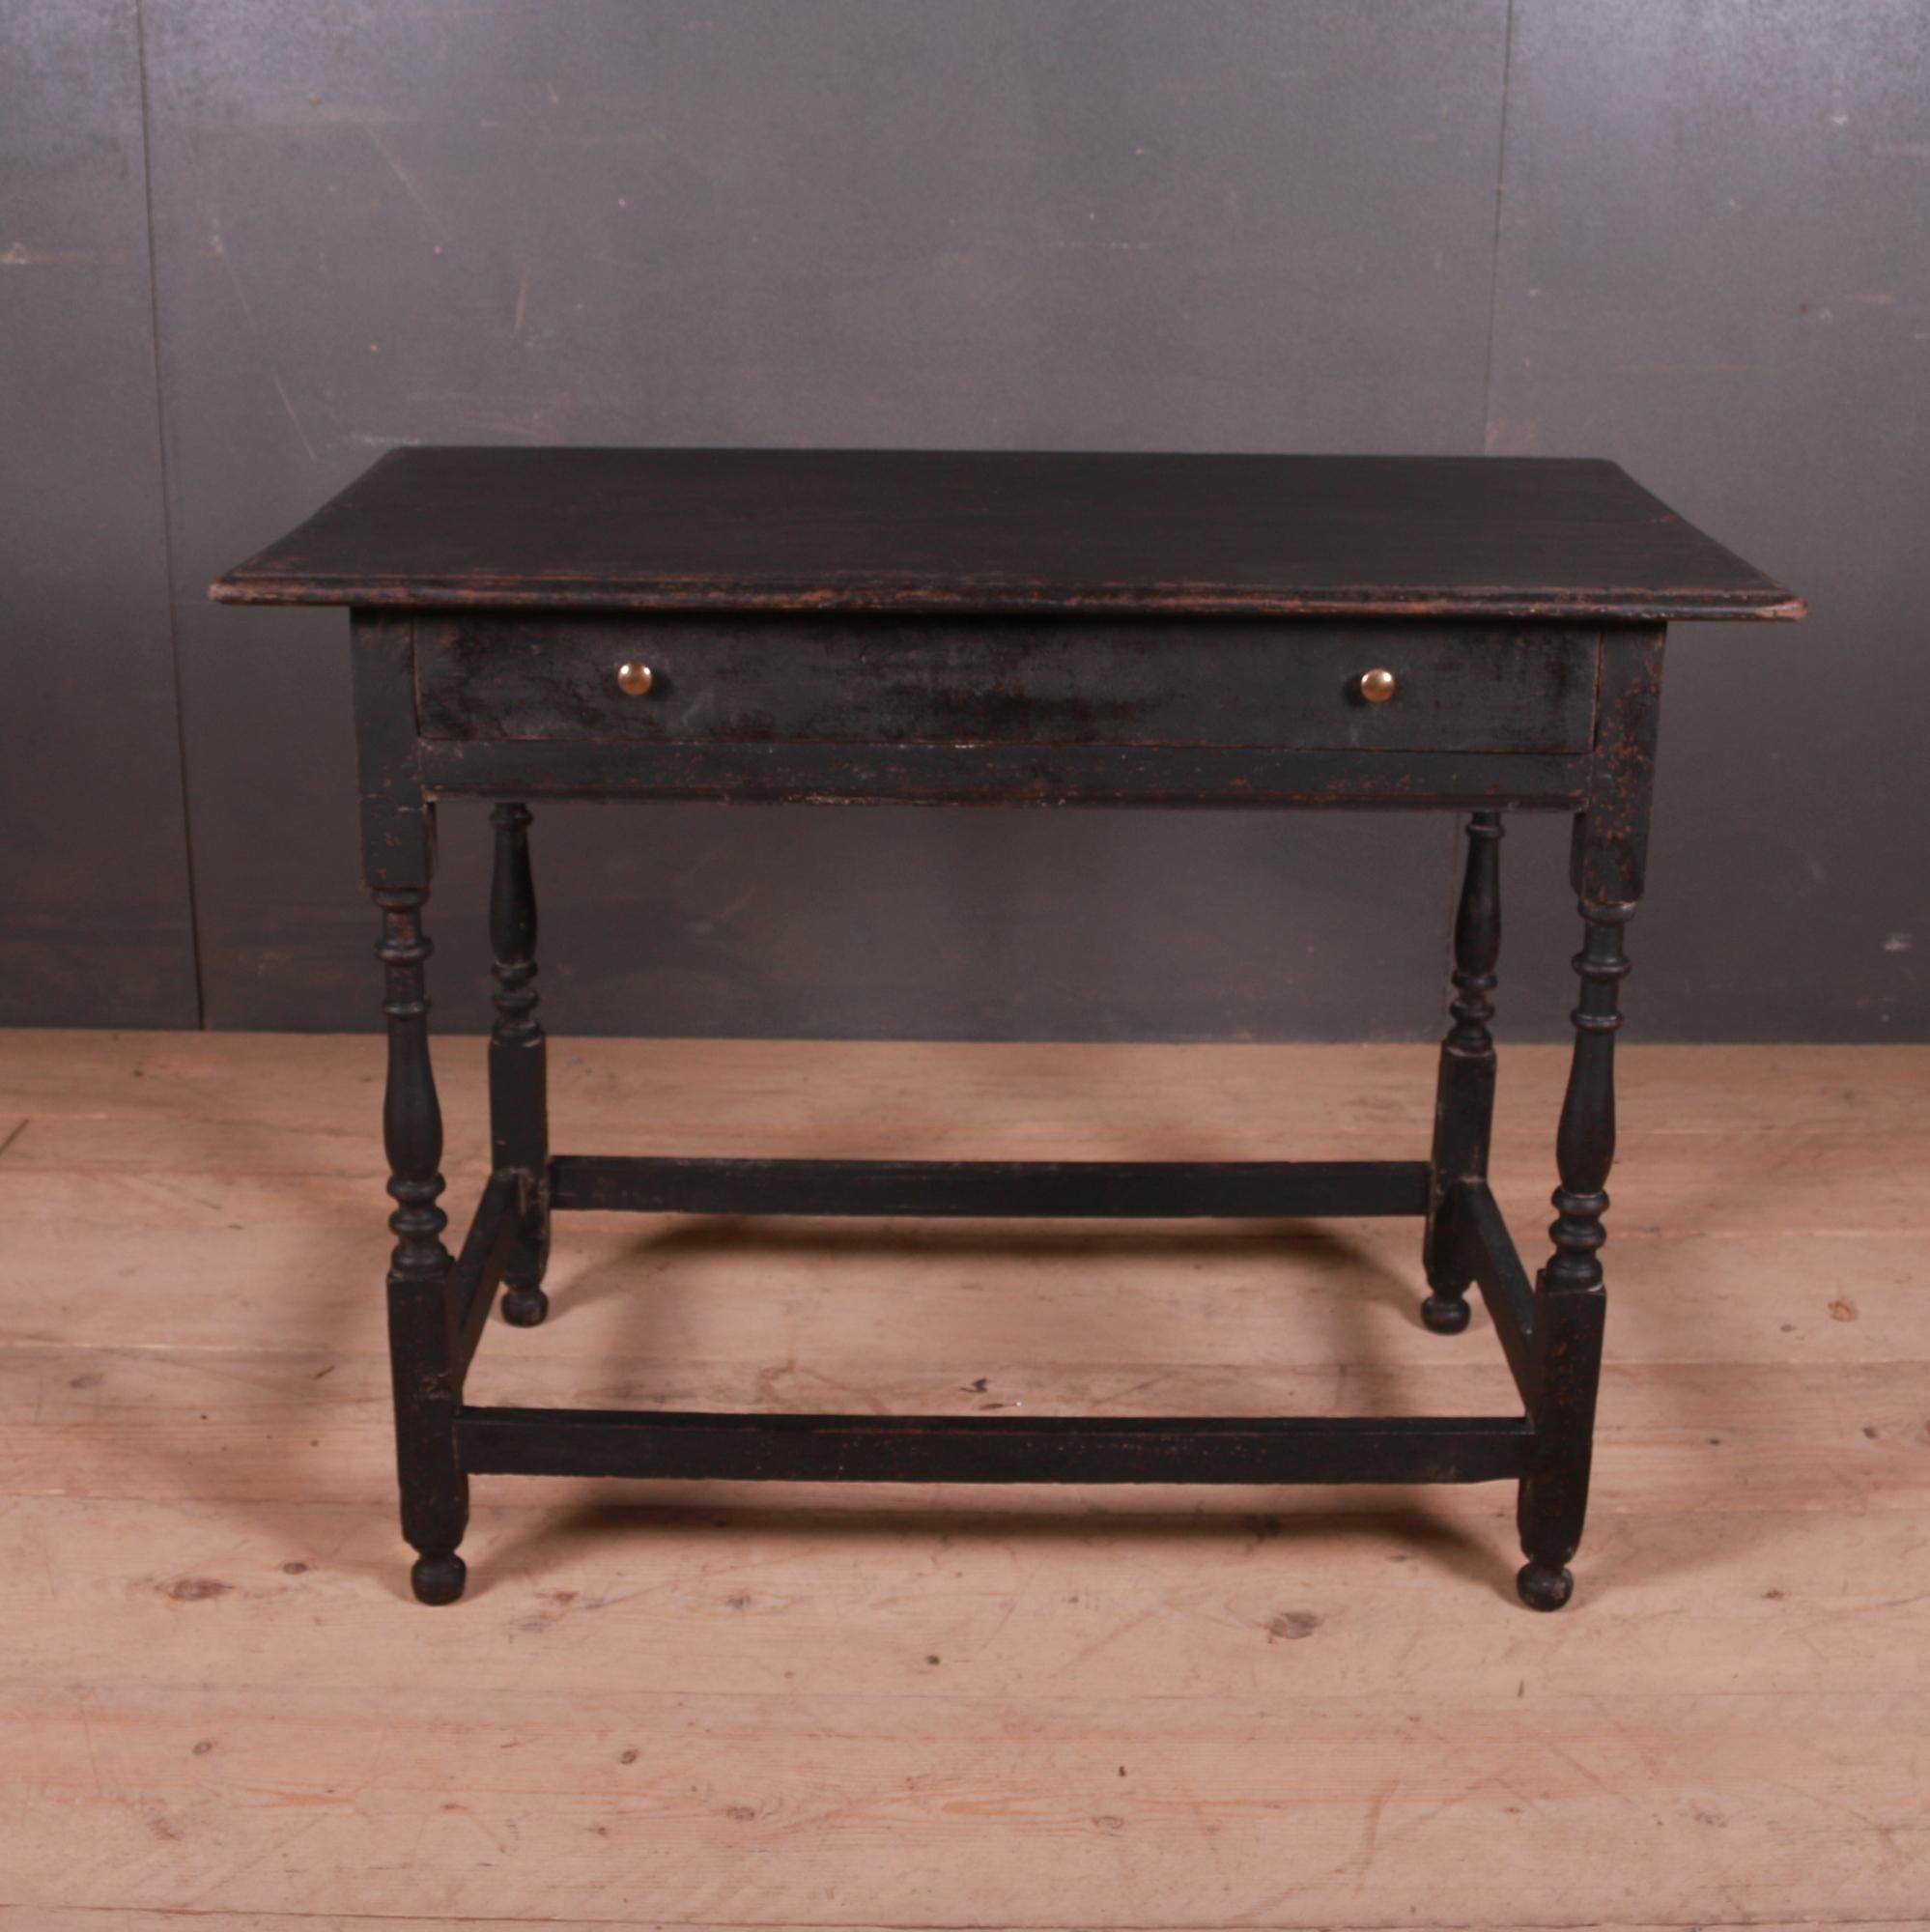 18th century English oak one-drawer painted side/lamp table, 1780.

Dimensions:
35.5 inches (90 cms) wide
20.5 inches (52 cms) deep
27 inches (69 cms) high.